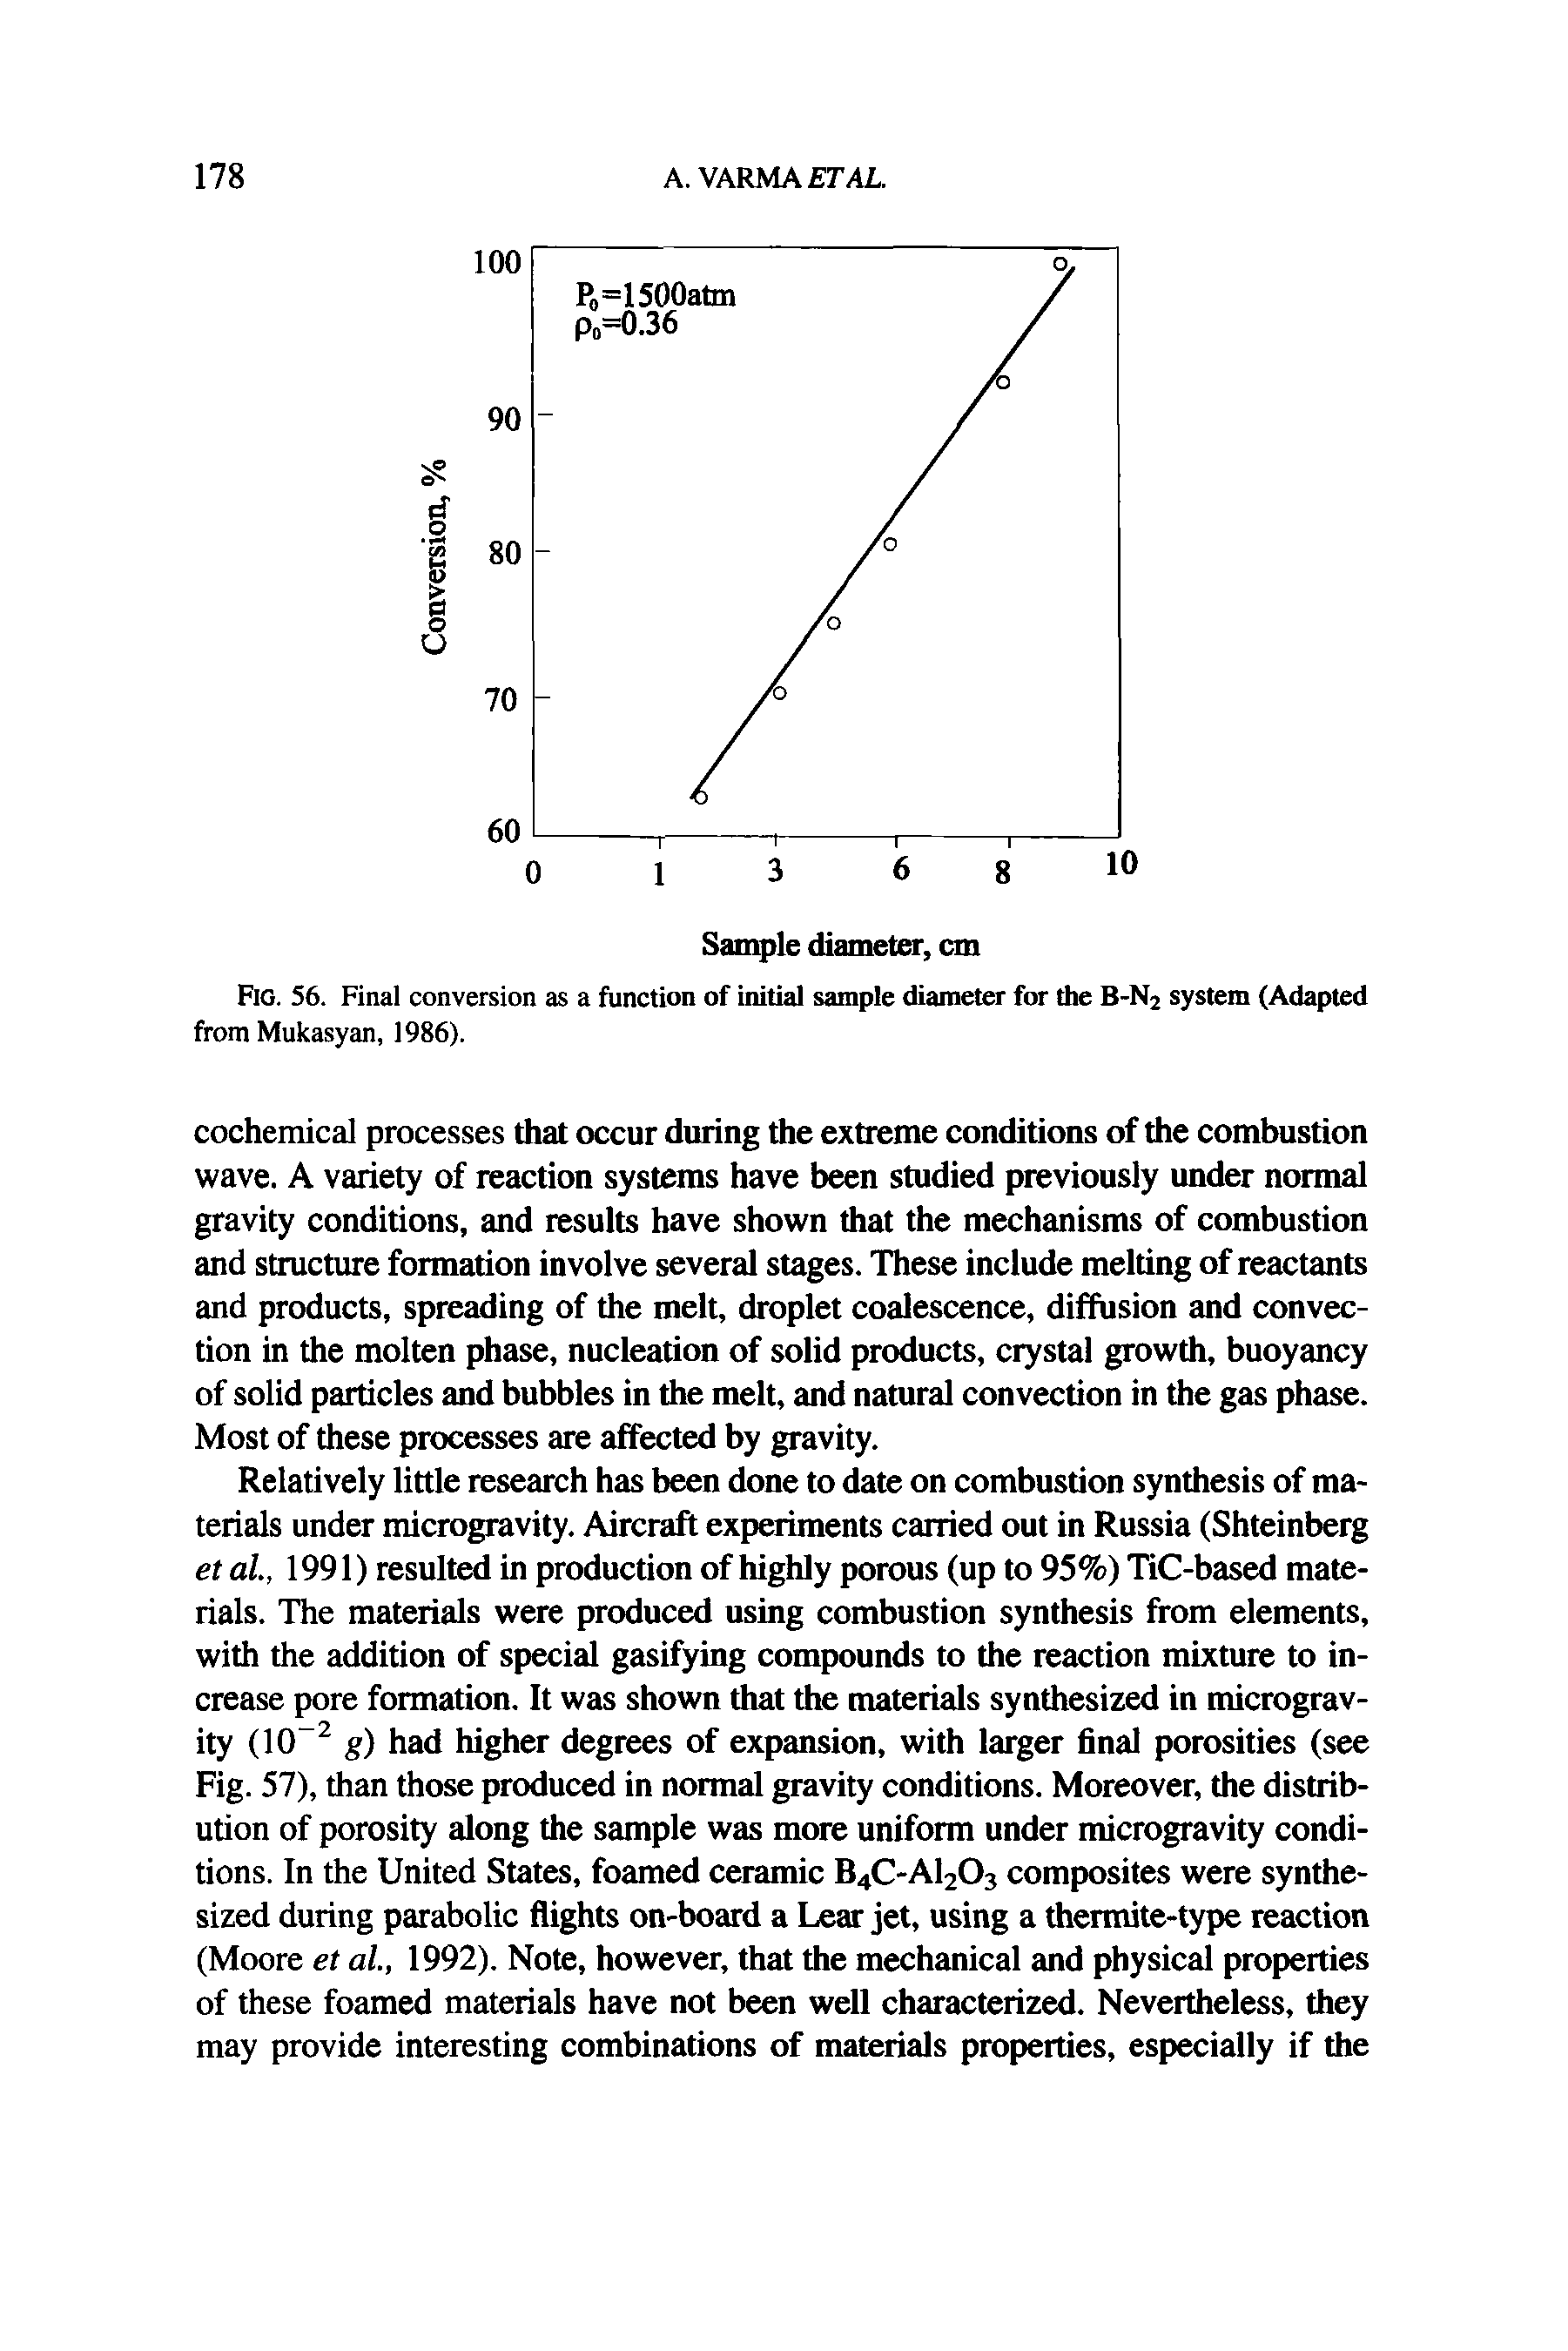 Fig. 56. Final conversion as a function of initial sample diameter for the B-N2 system (Adapted from Mukasyan, 1986).